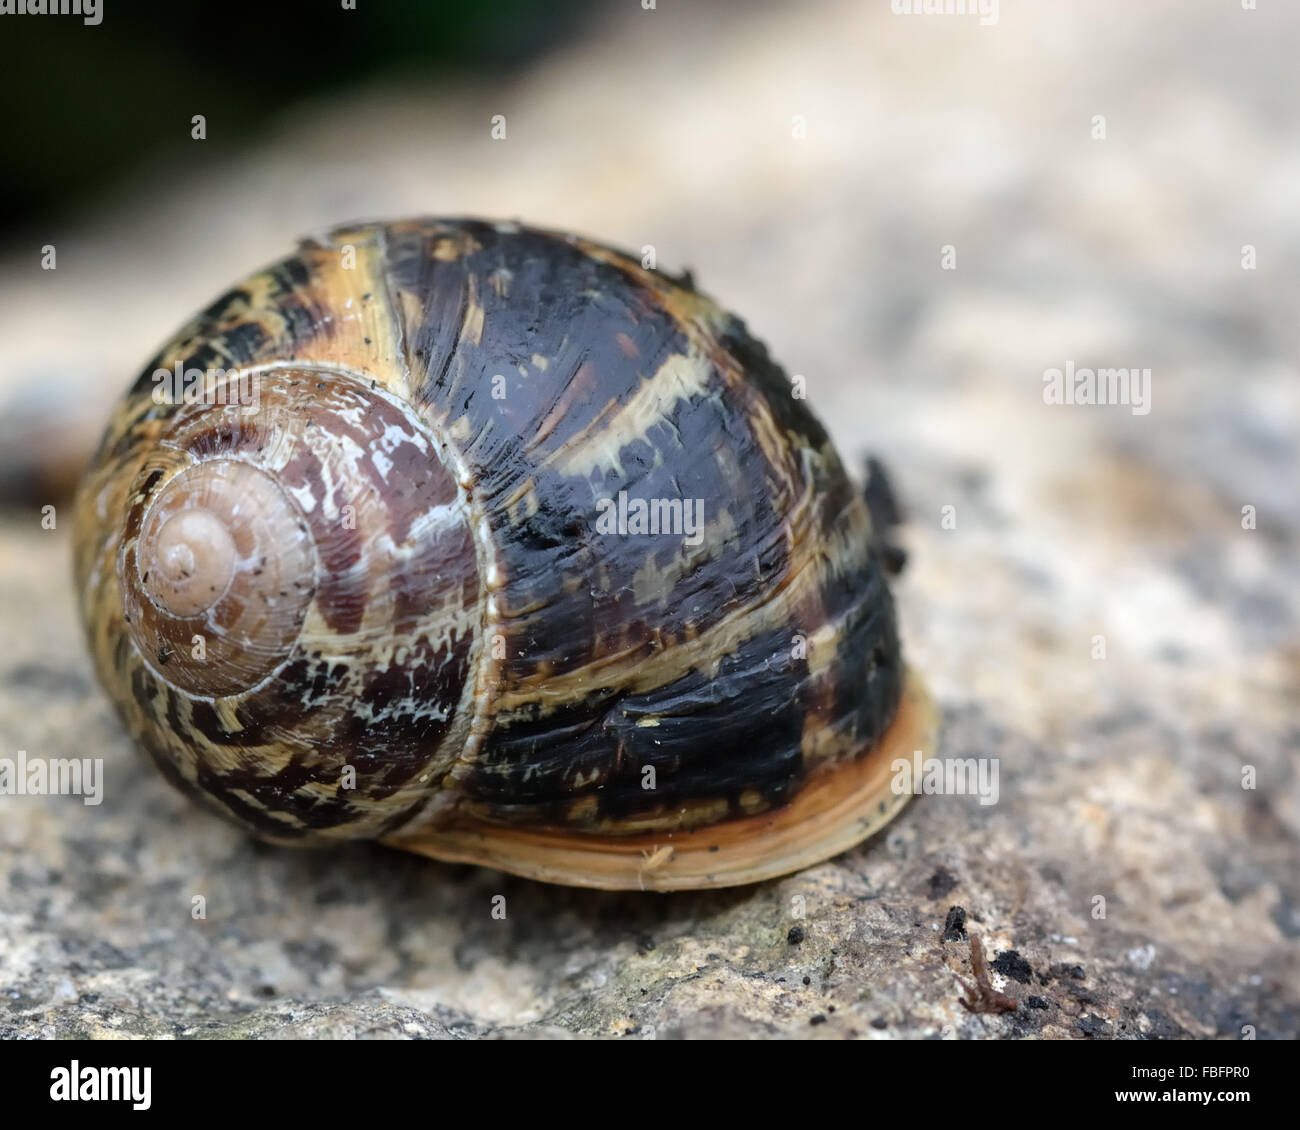 Garden snail (Cornu aspersum). A snail in the family Helicidae showing surface of shell peeling Stock Photo